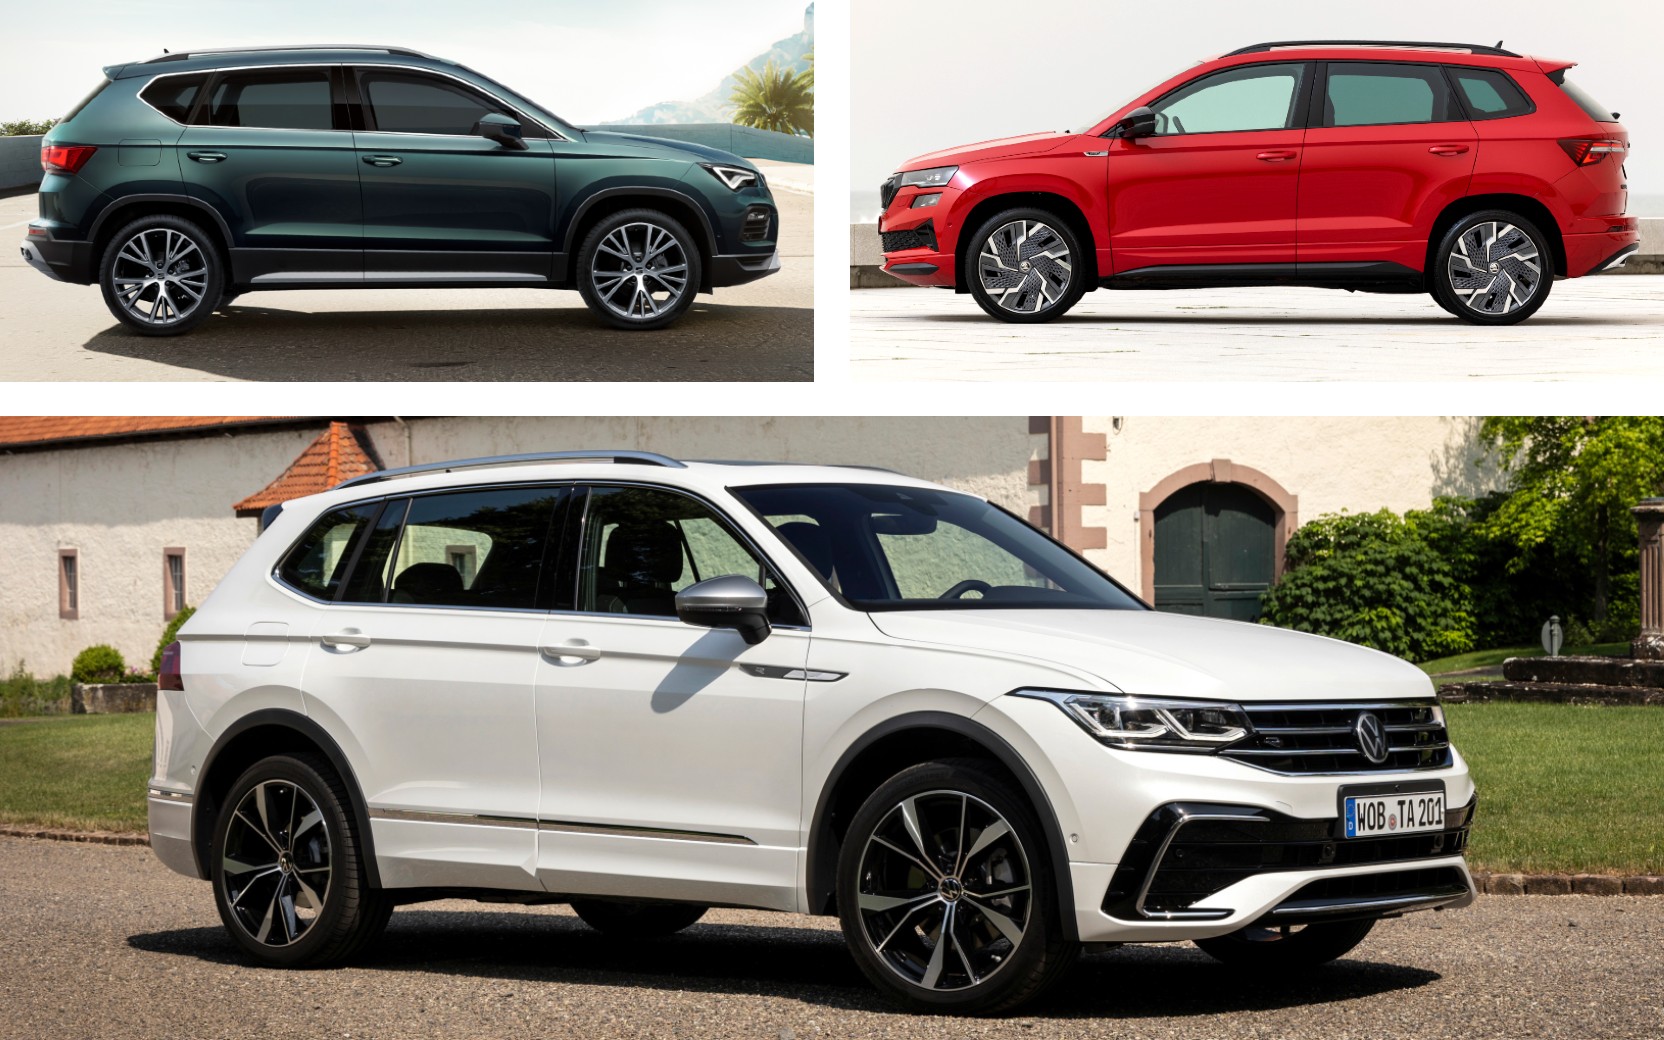 VW, Skoda, And Seat Models To Share More Parts Under Their Uniquely  Designed Bodies